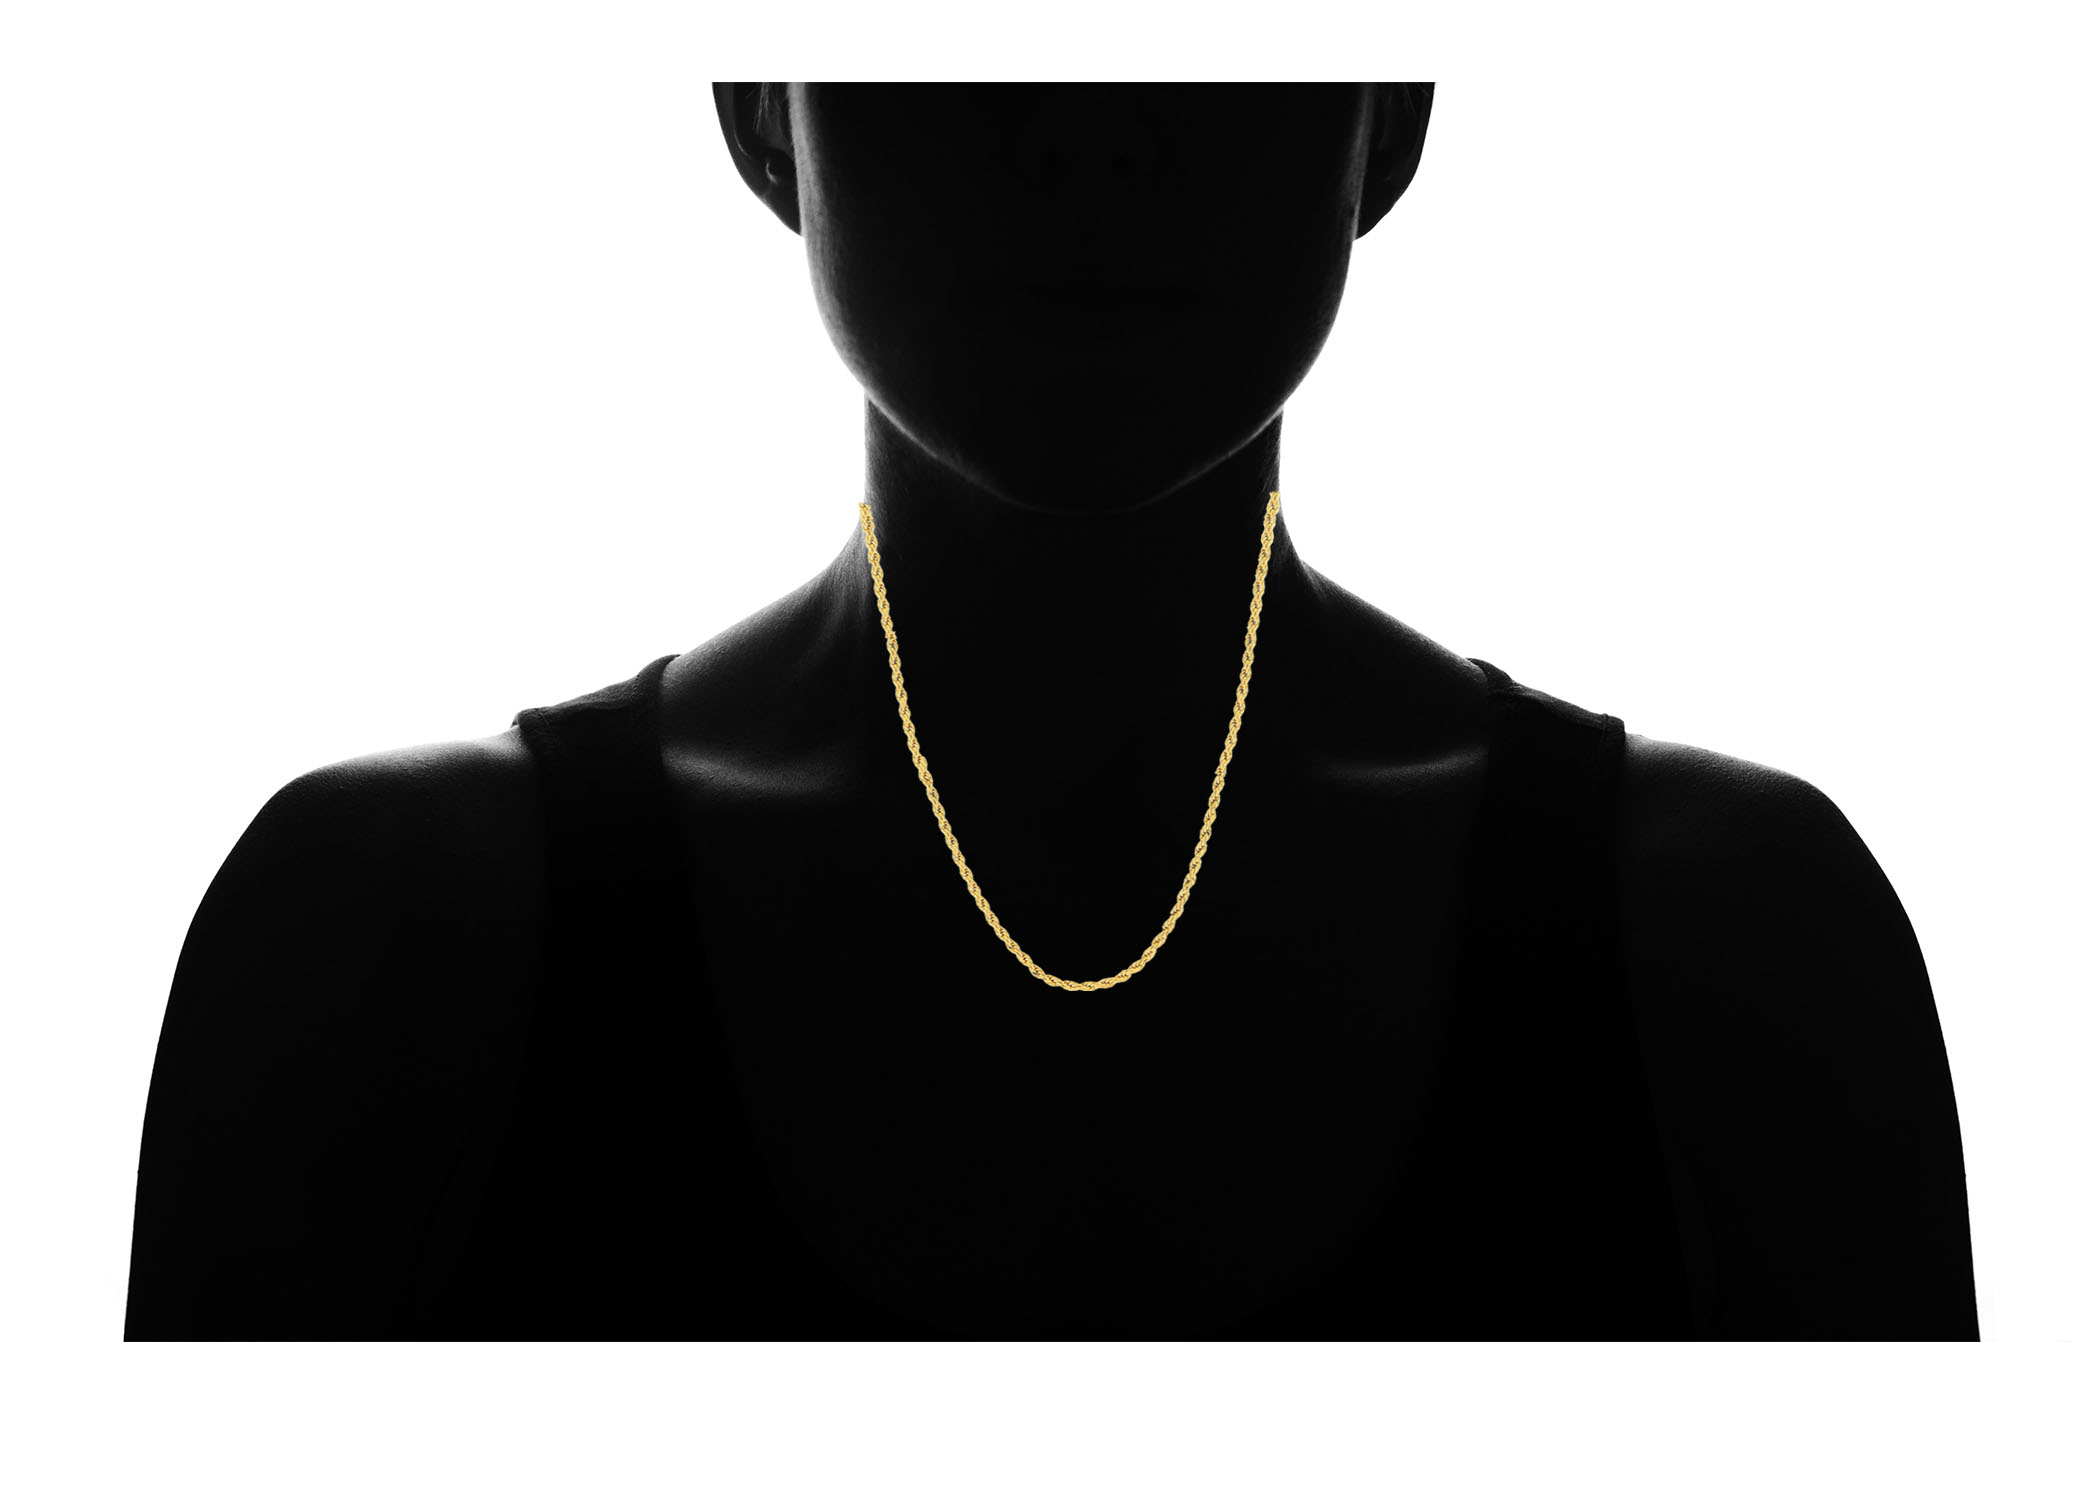 14K Yellow Gold 3mm Rope Chain, 16" - image 3 of 6